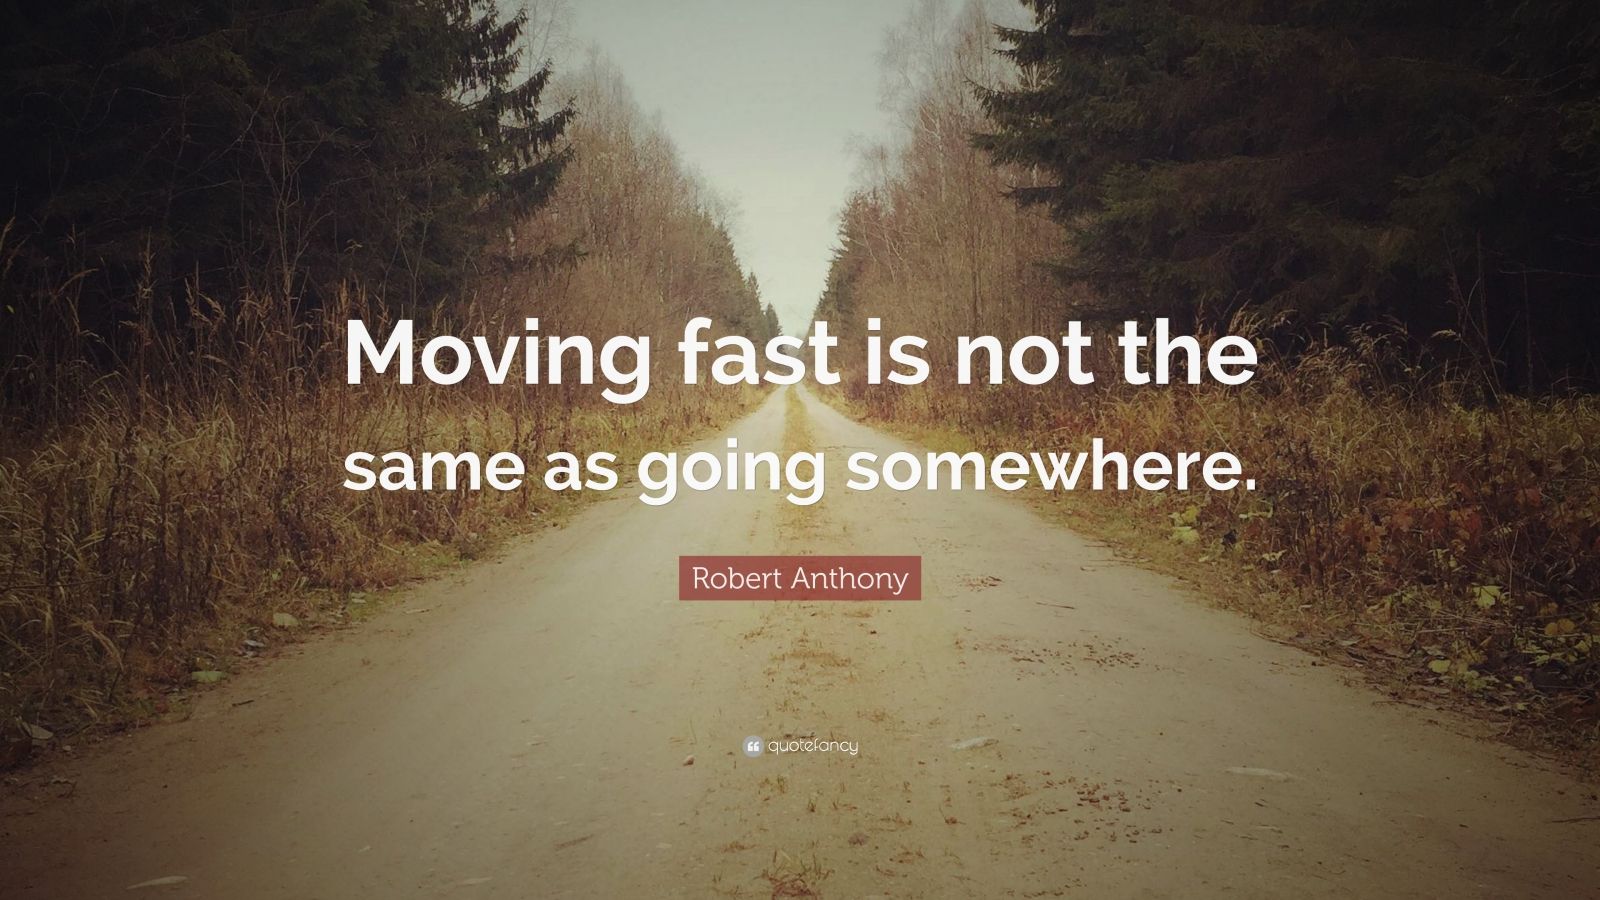 Robert Anthony Quote “Moving fast is not the same as going somewhere